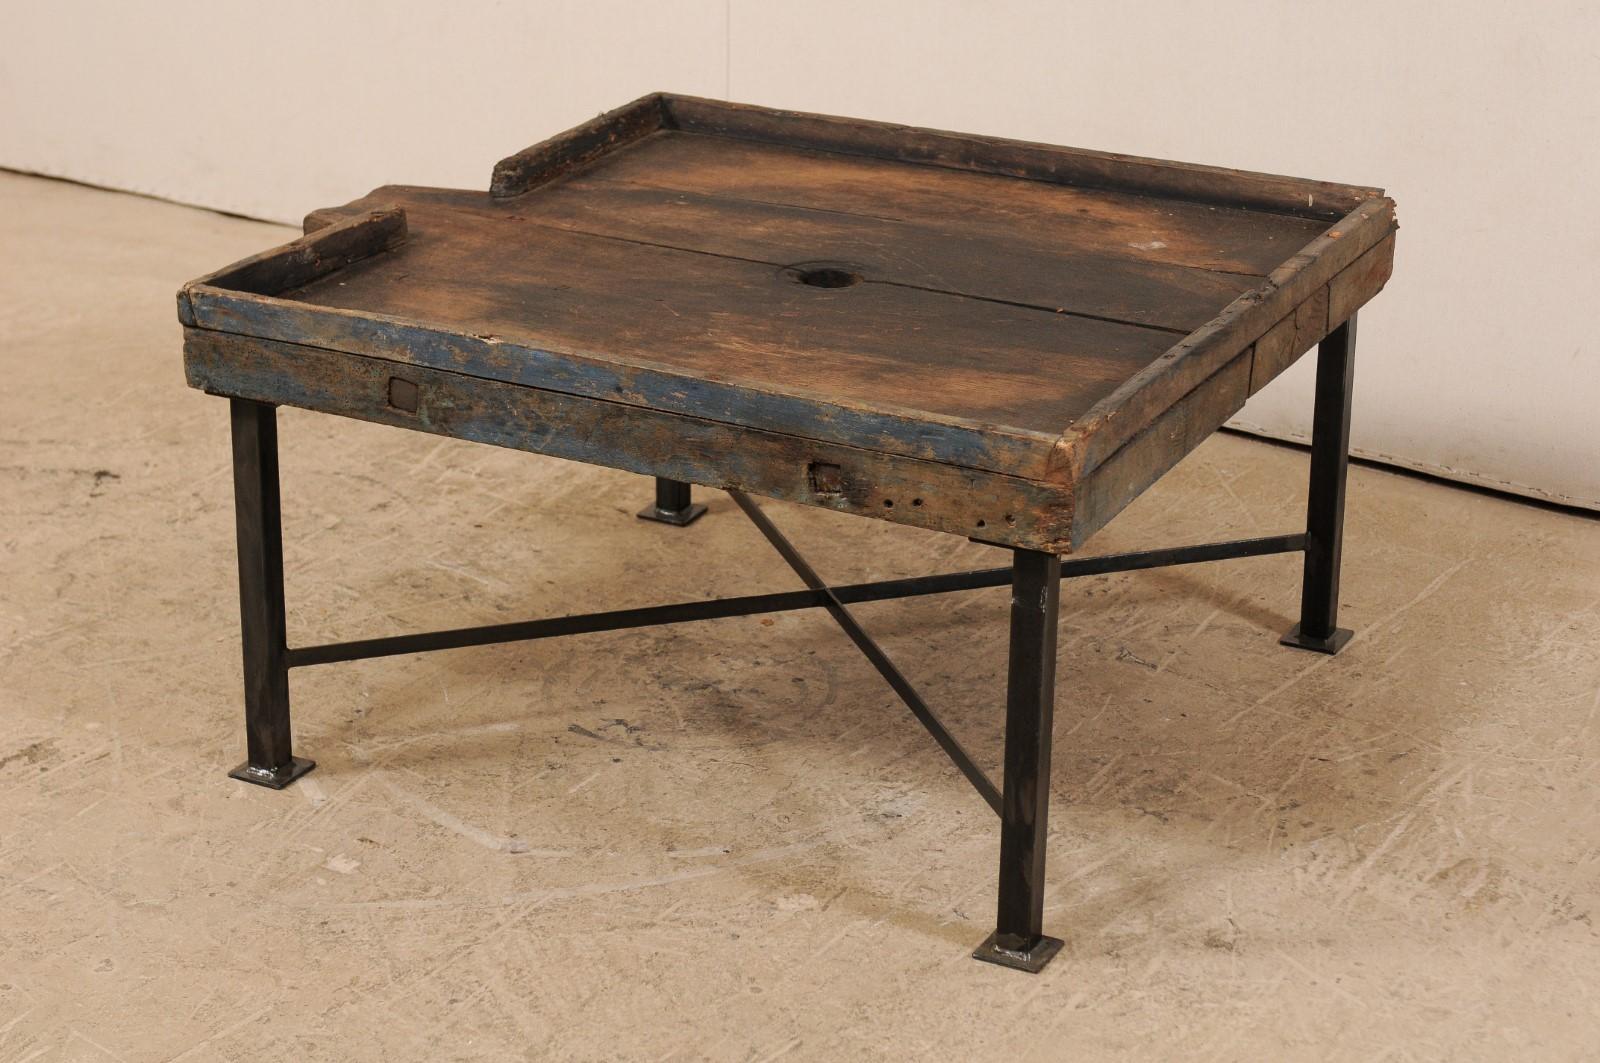 Carved 19th Century Spanish Wood Olive Trough Coffee Table with Modern Metal Base